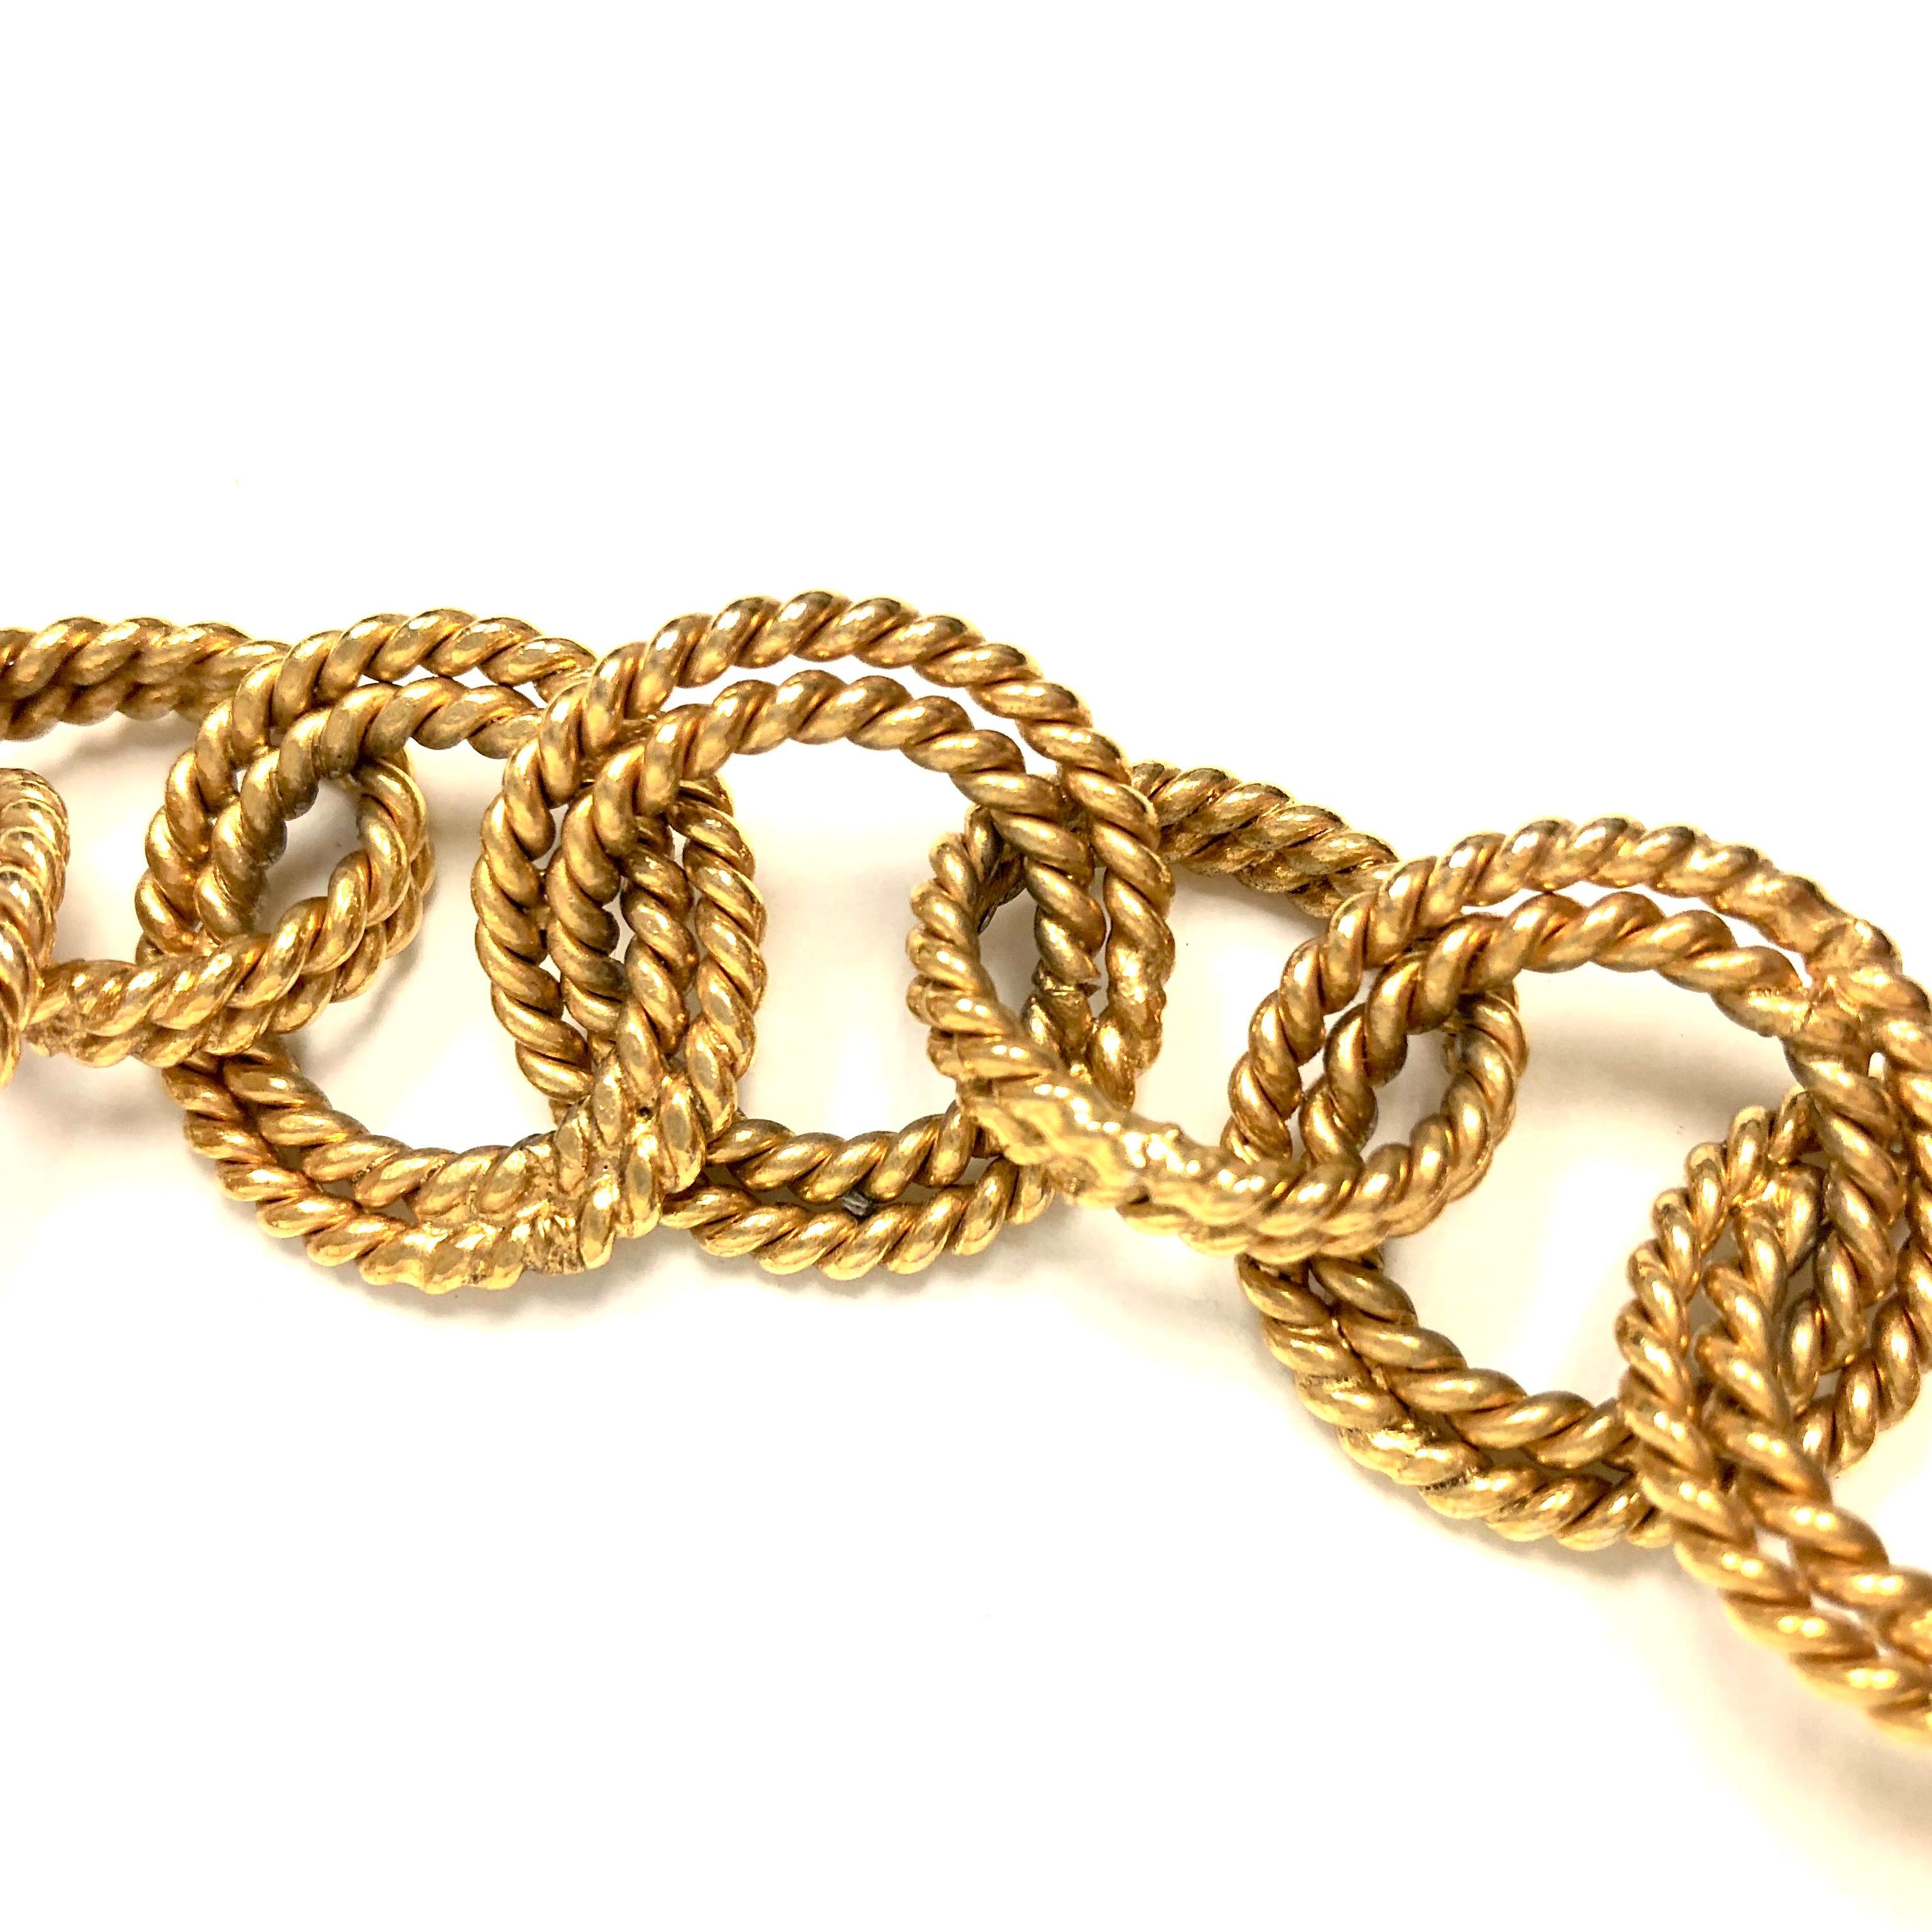 Gorgeous vintage Chanel gold tone circle links chain necklace with double rope style. Hook closure with CC logo. Based on the stampes on the plaque the necklace dates back to 1986-1992, when Victoire de Castellane came to Chanel as Lagerfeld's